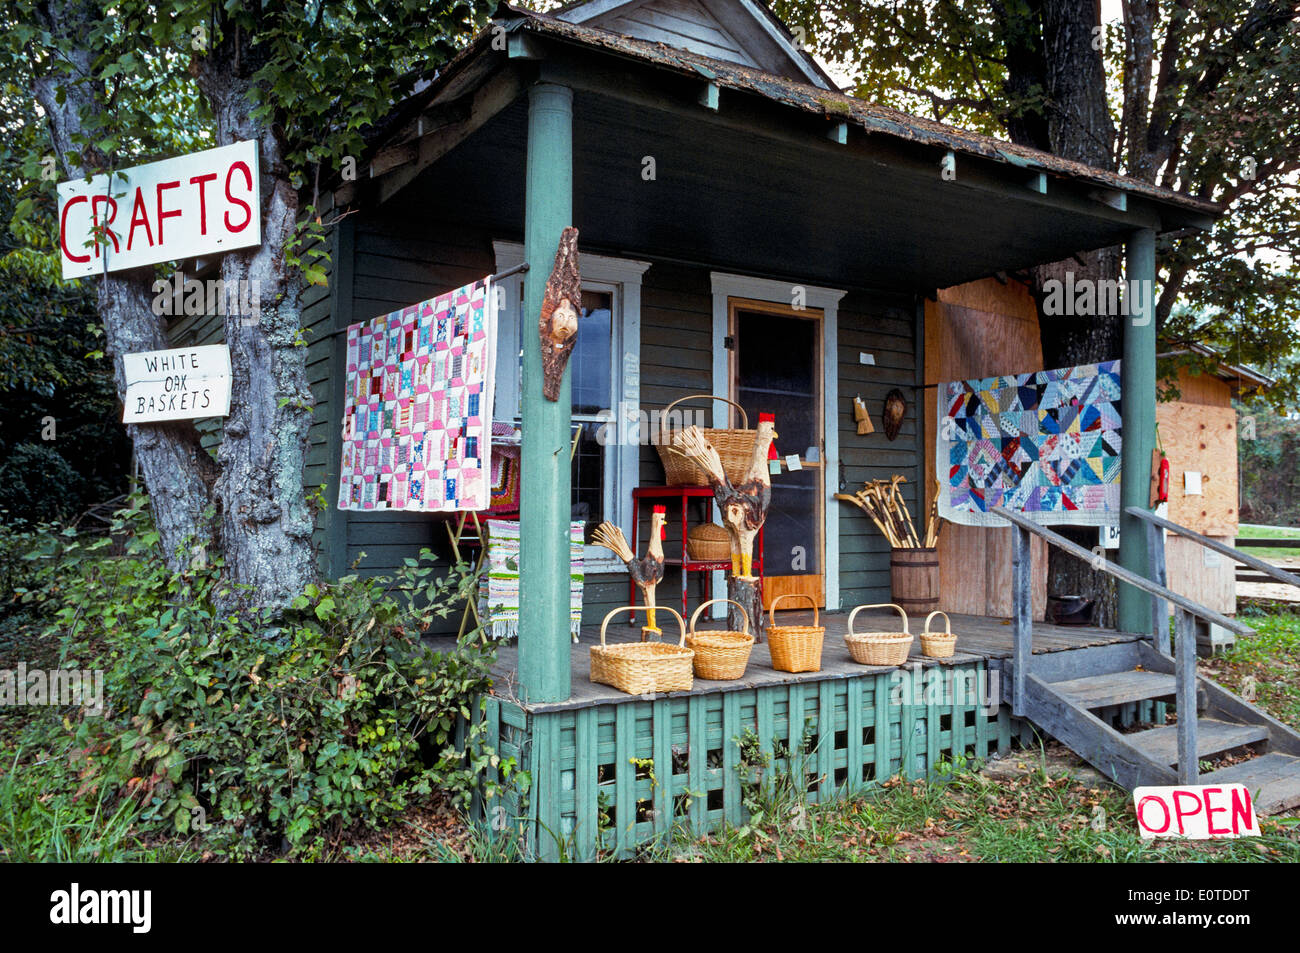 Quilts, woven baskets and other American handicrafts are offered for sale at this rural home in the Ozark Mountains at Brashears, Arkansas, USA. Stock Photo